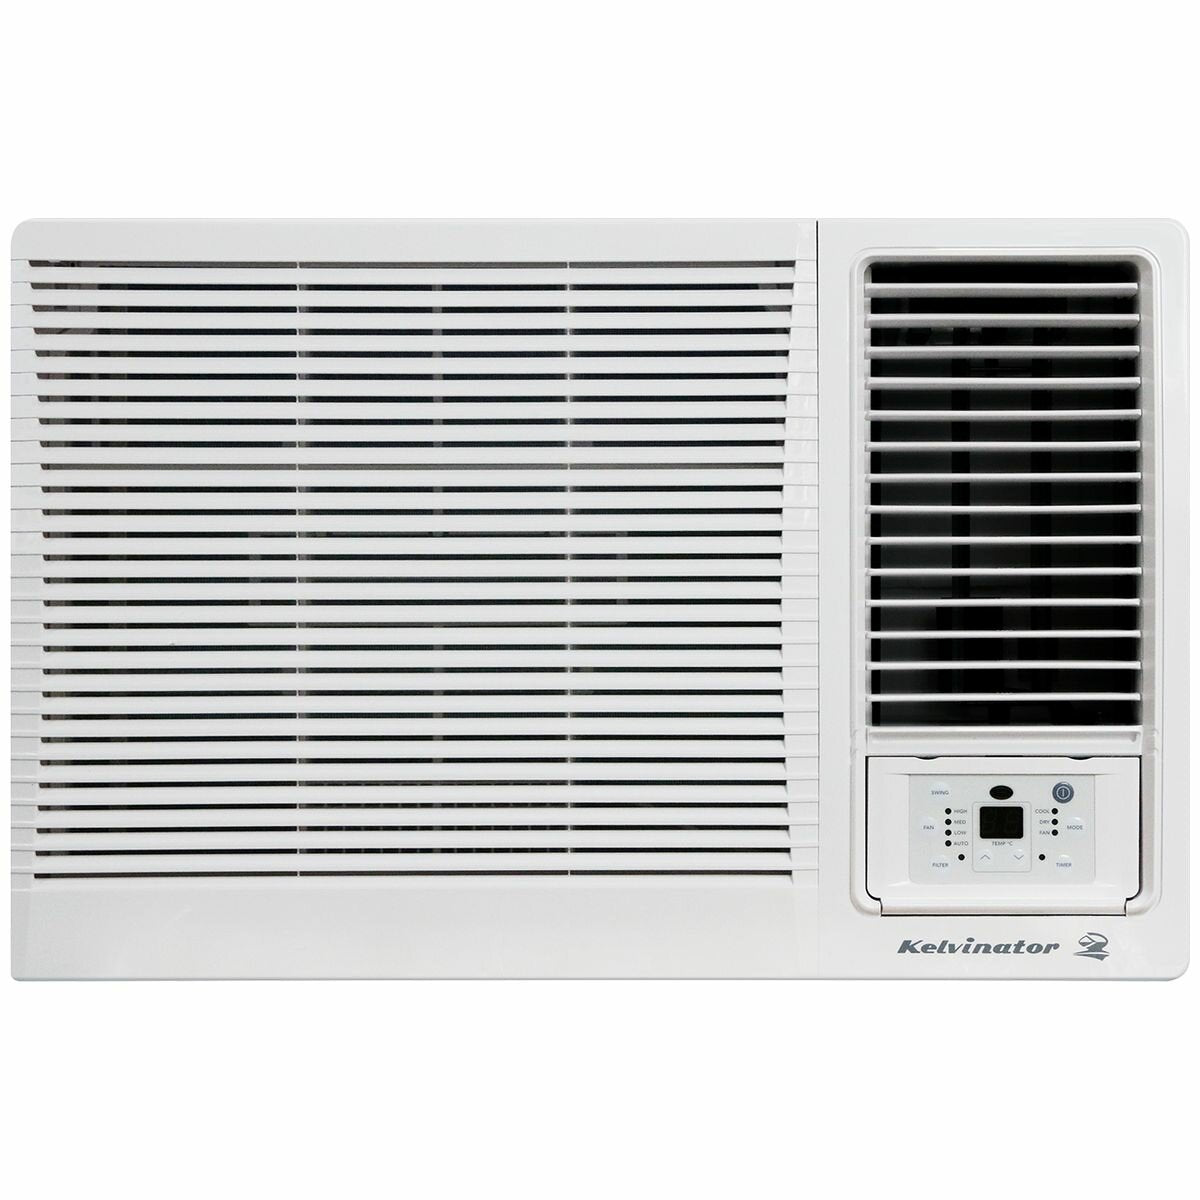 Kelvinator 6.0kw Window/Wall Cooling Only Air Conditioner Model KWH60CRF